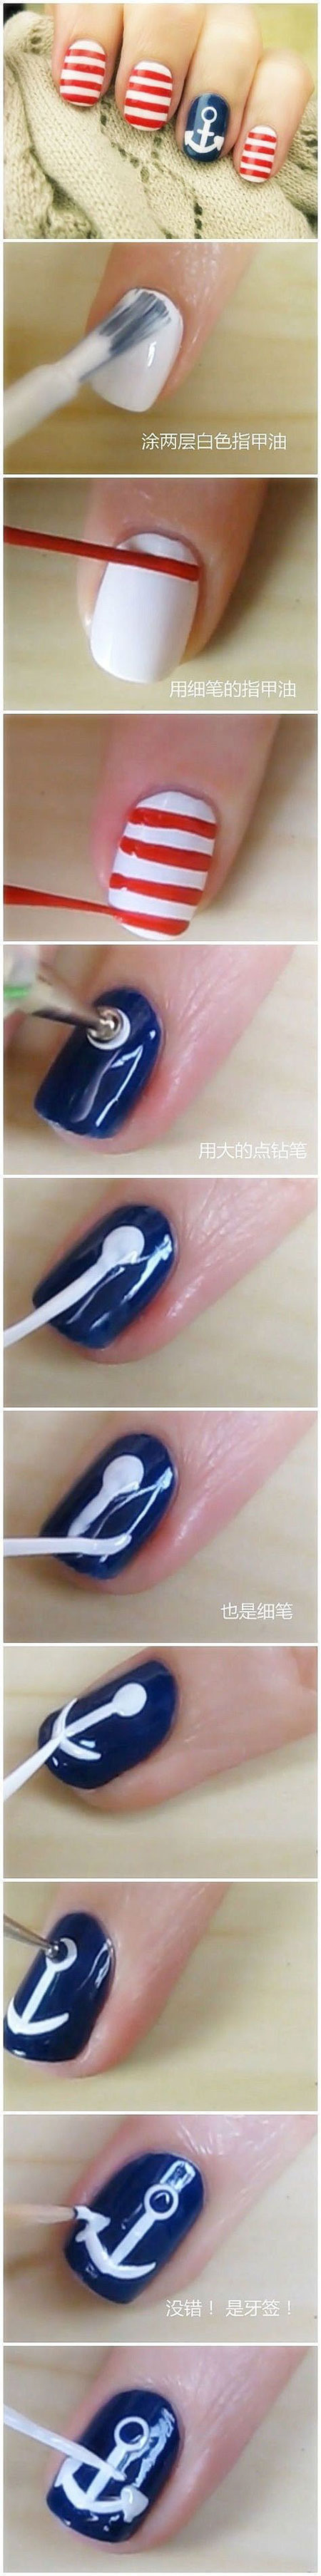 15-Easy-Summer-Inspired-Nail-Art-Tutorials-For-Beginners-Learners-2014-10